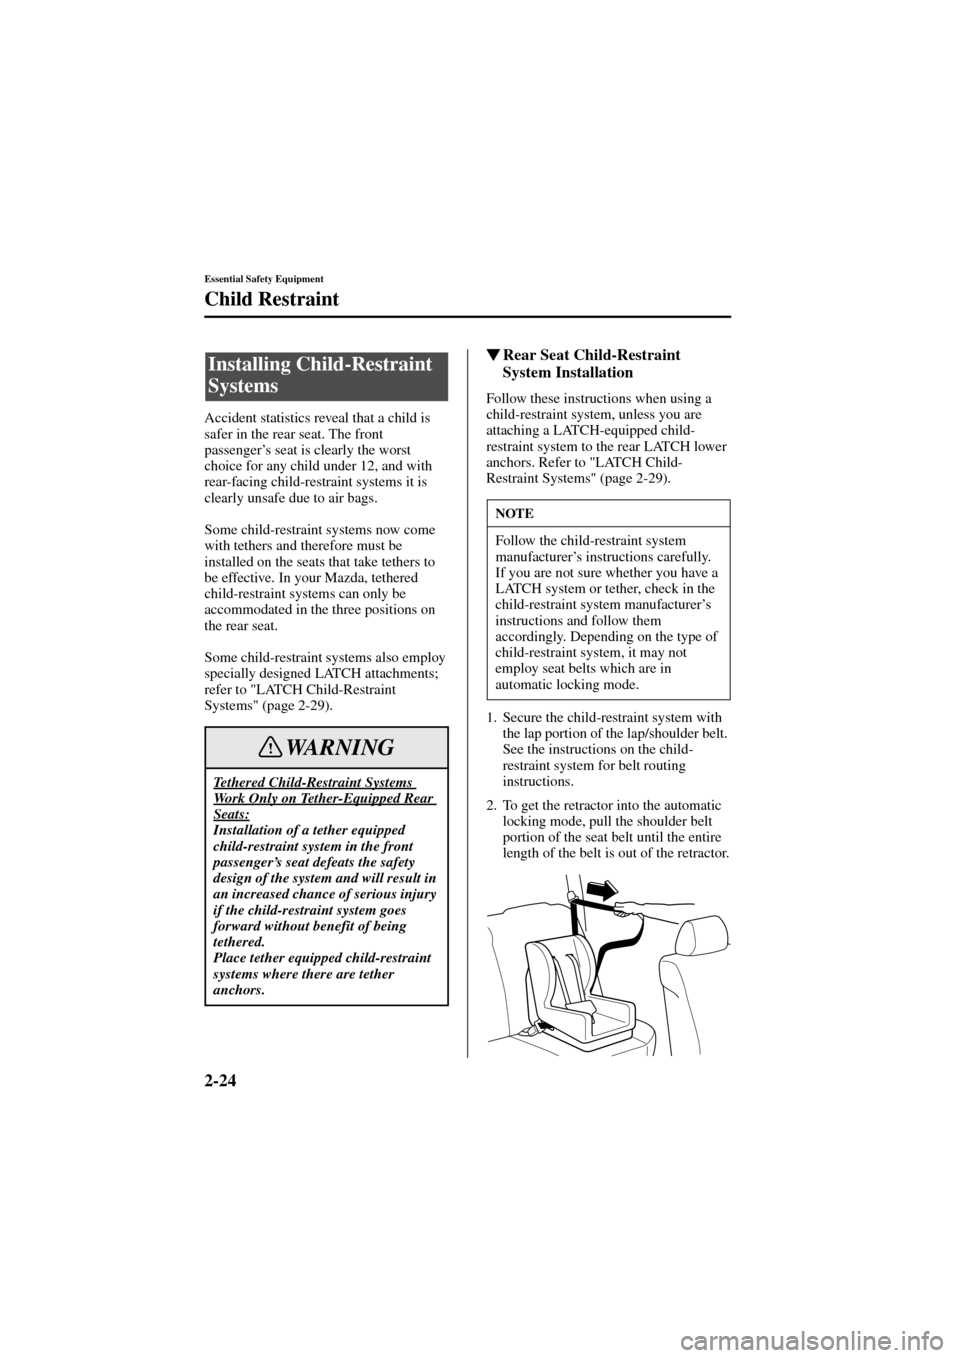 MAZDA MODEL 6 2004  Owners Manual (in English) 2-24
Essential Safety Equipment
Child Restraint
Form No. 8R29-EA-02I
Accident statistics reveal that a child is 
safer in the rear seat. The front 
passenger’s seat is clearly the worst 
choice for 